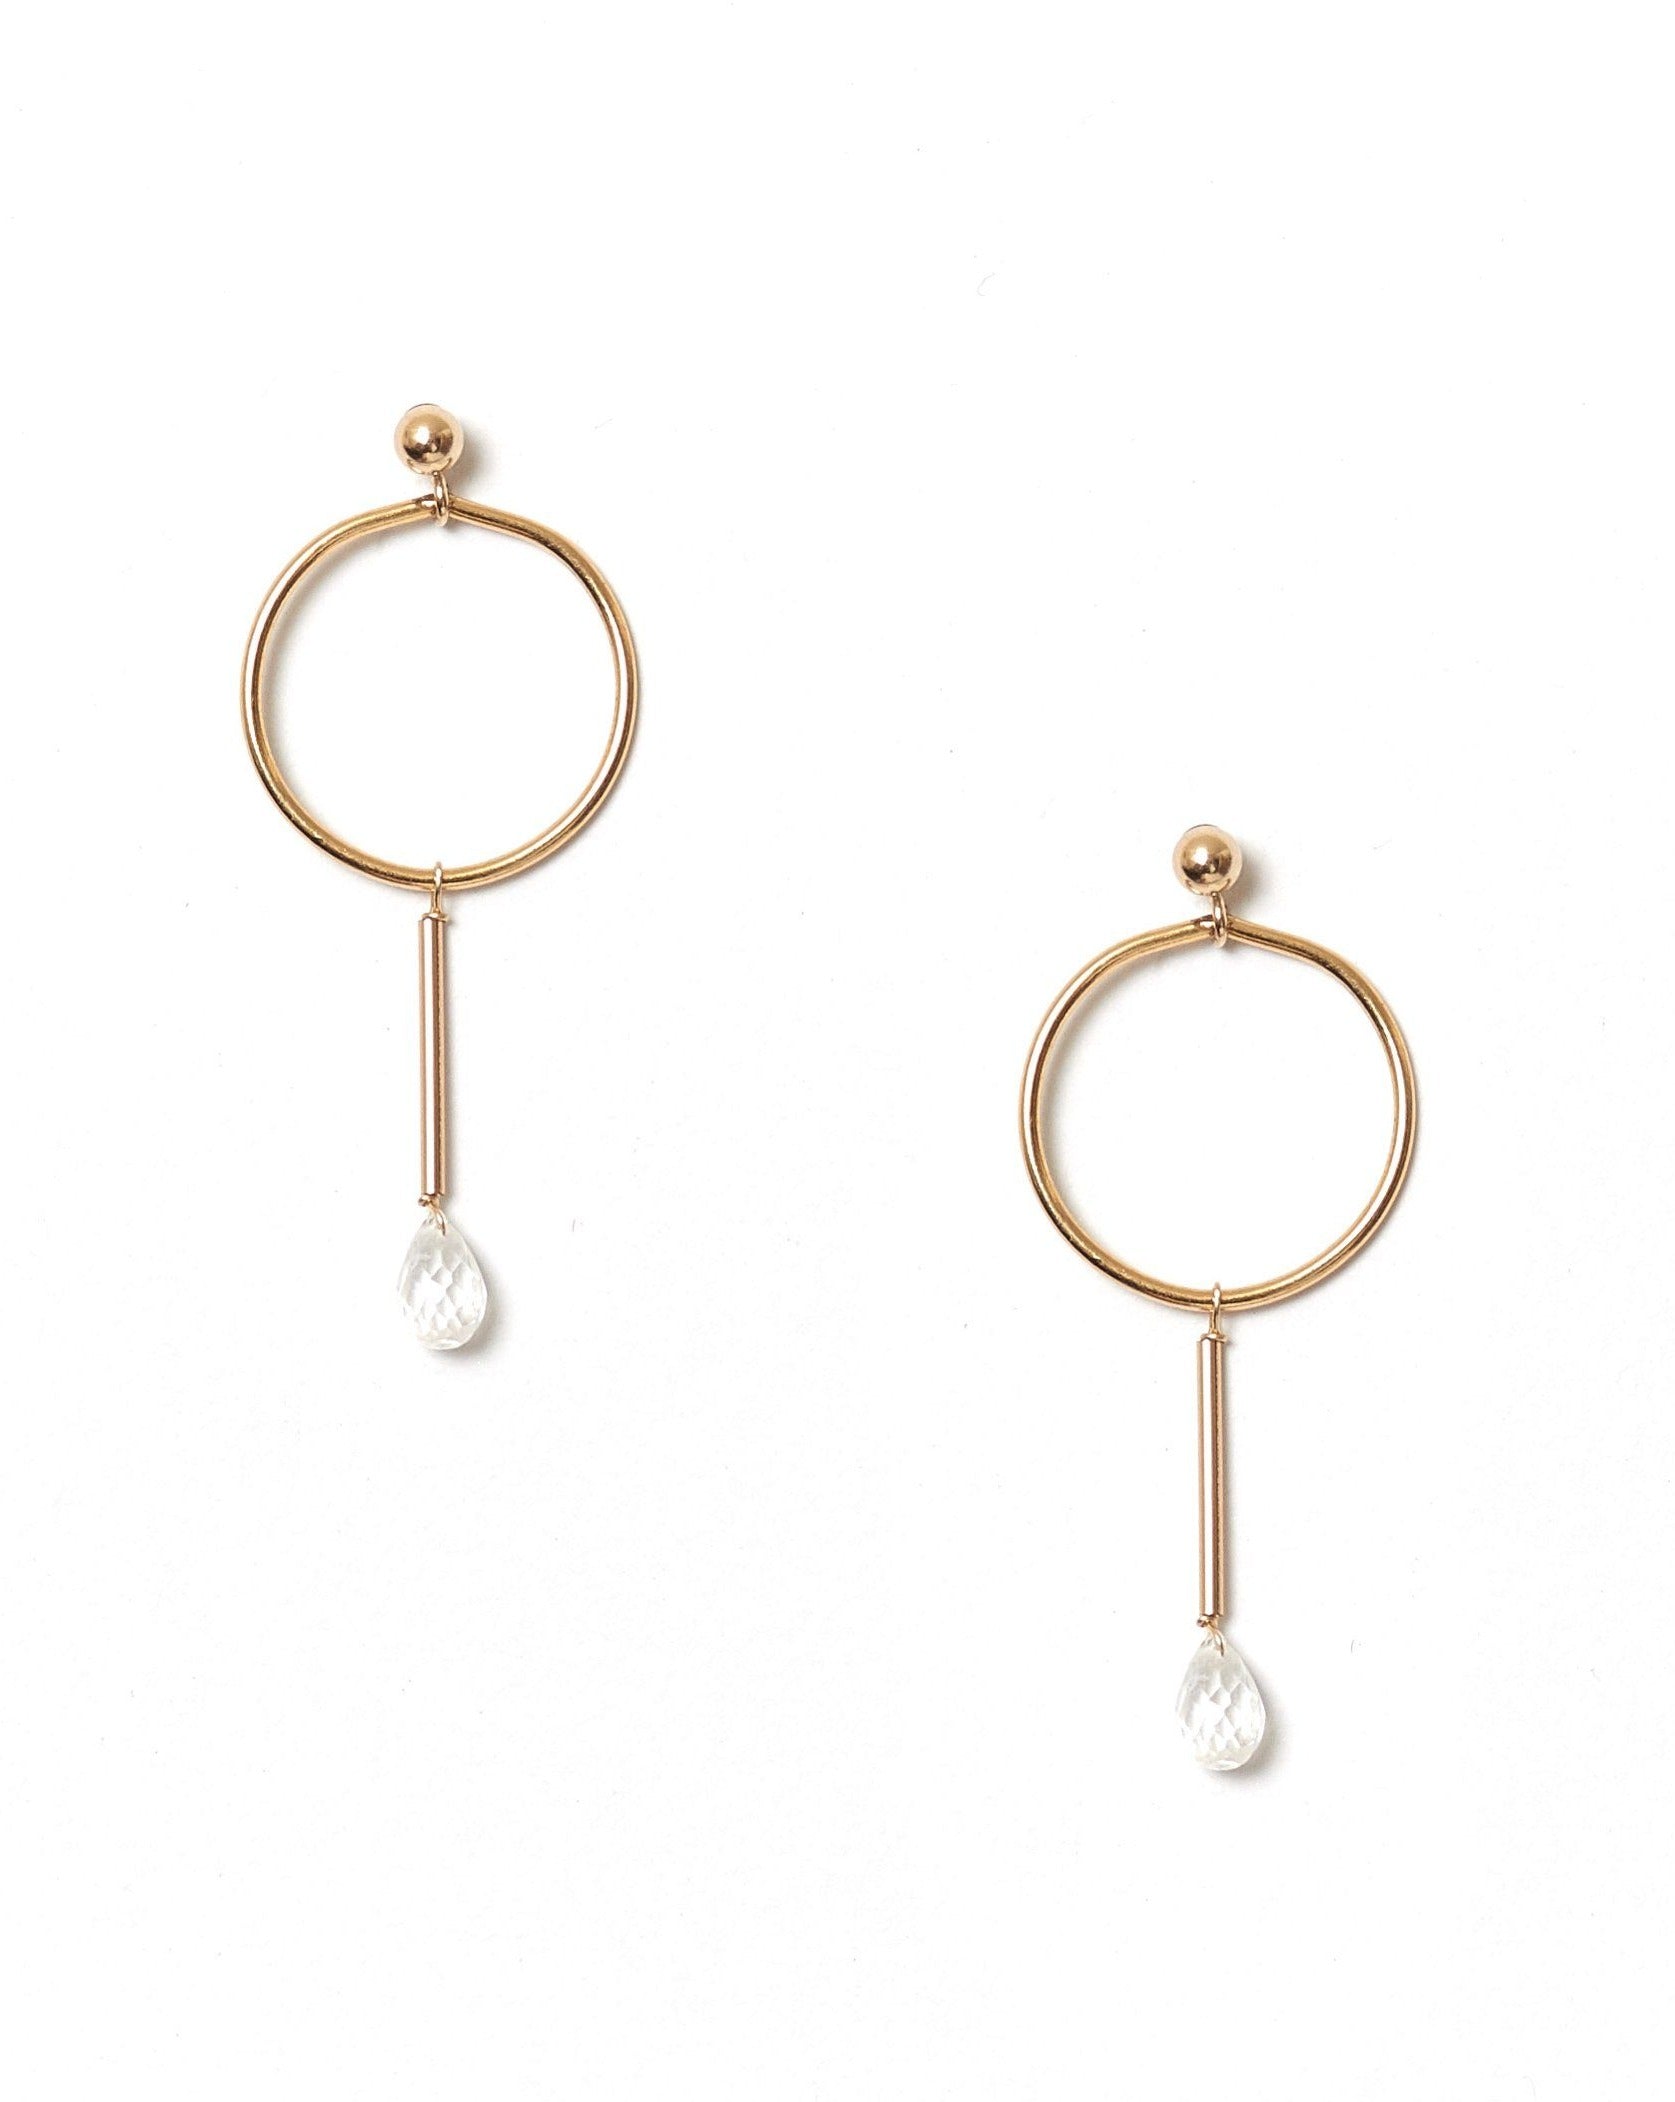 Osea Earrings by KOZAKH. Ball stud drop earrings in 14K Gold Filled, featuring a faceted Moonstone droplet.